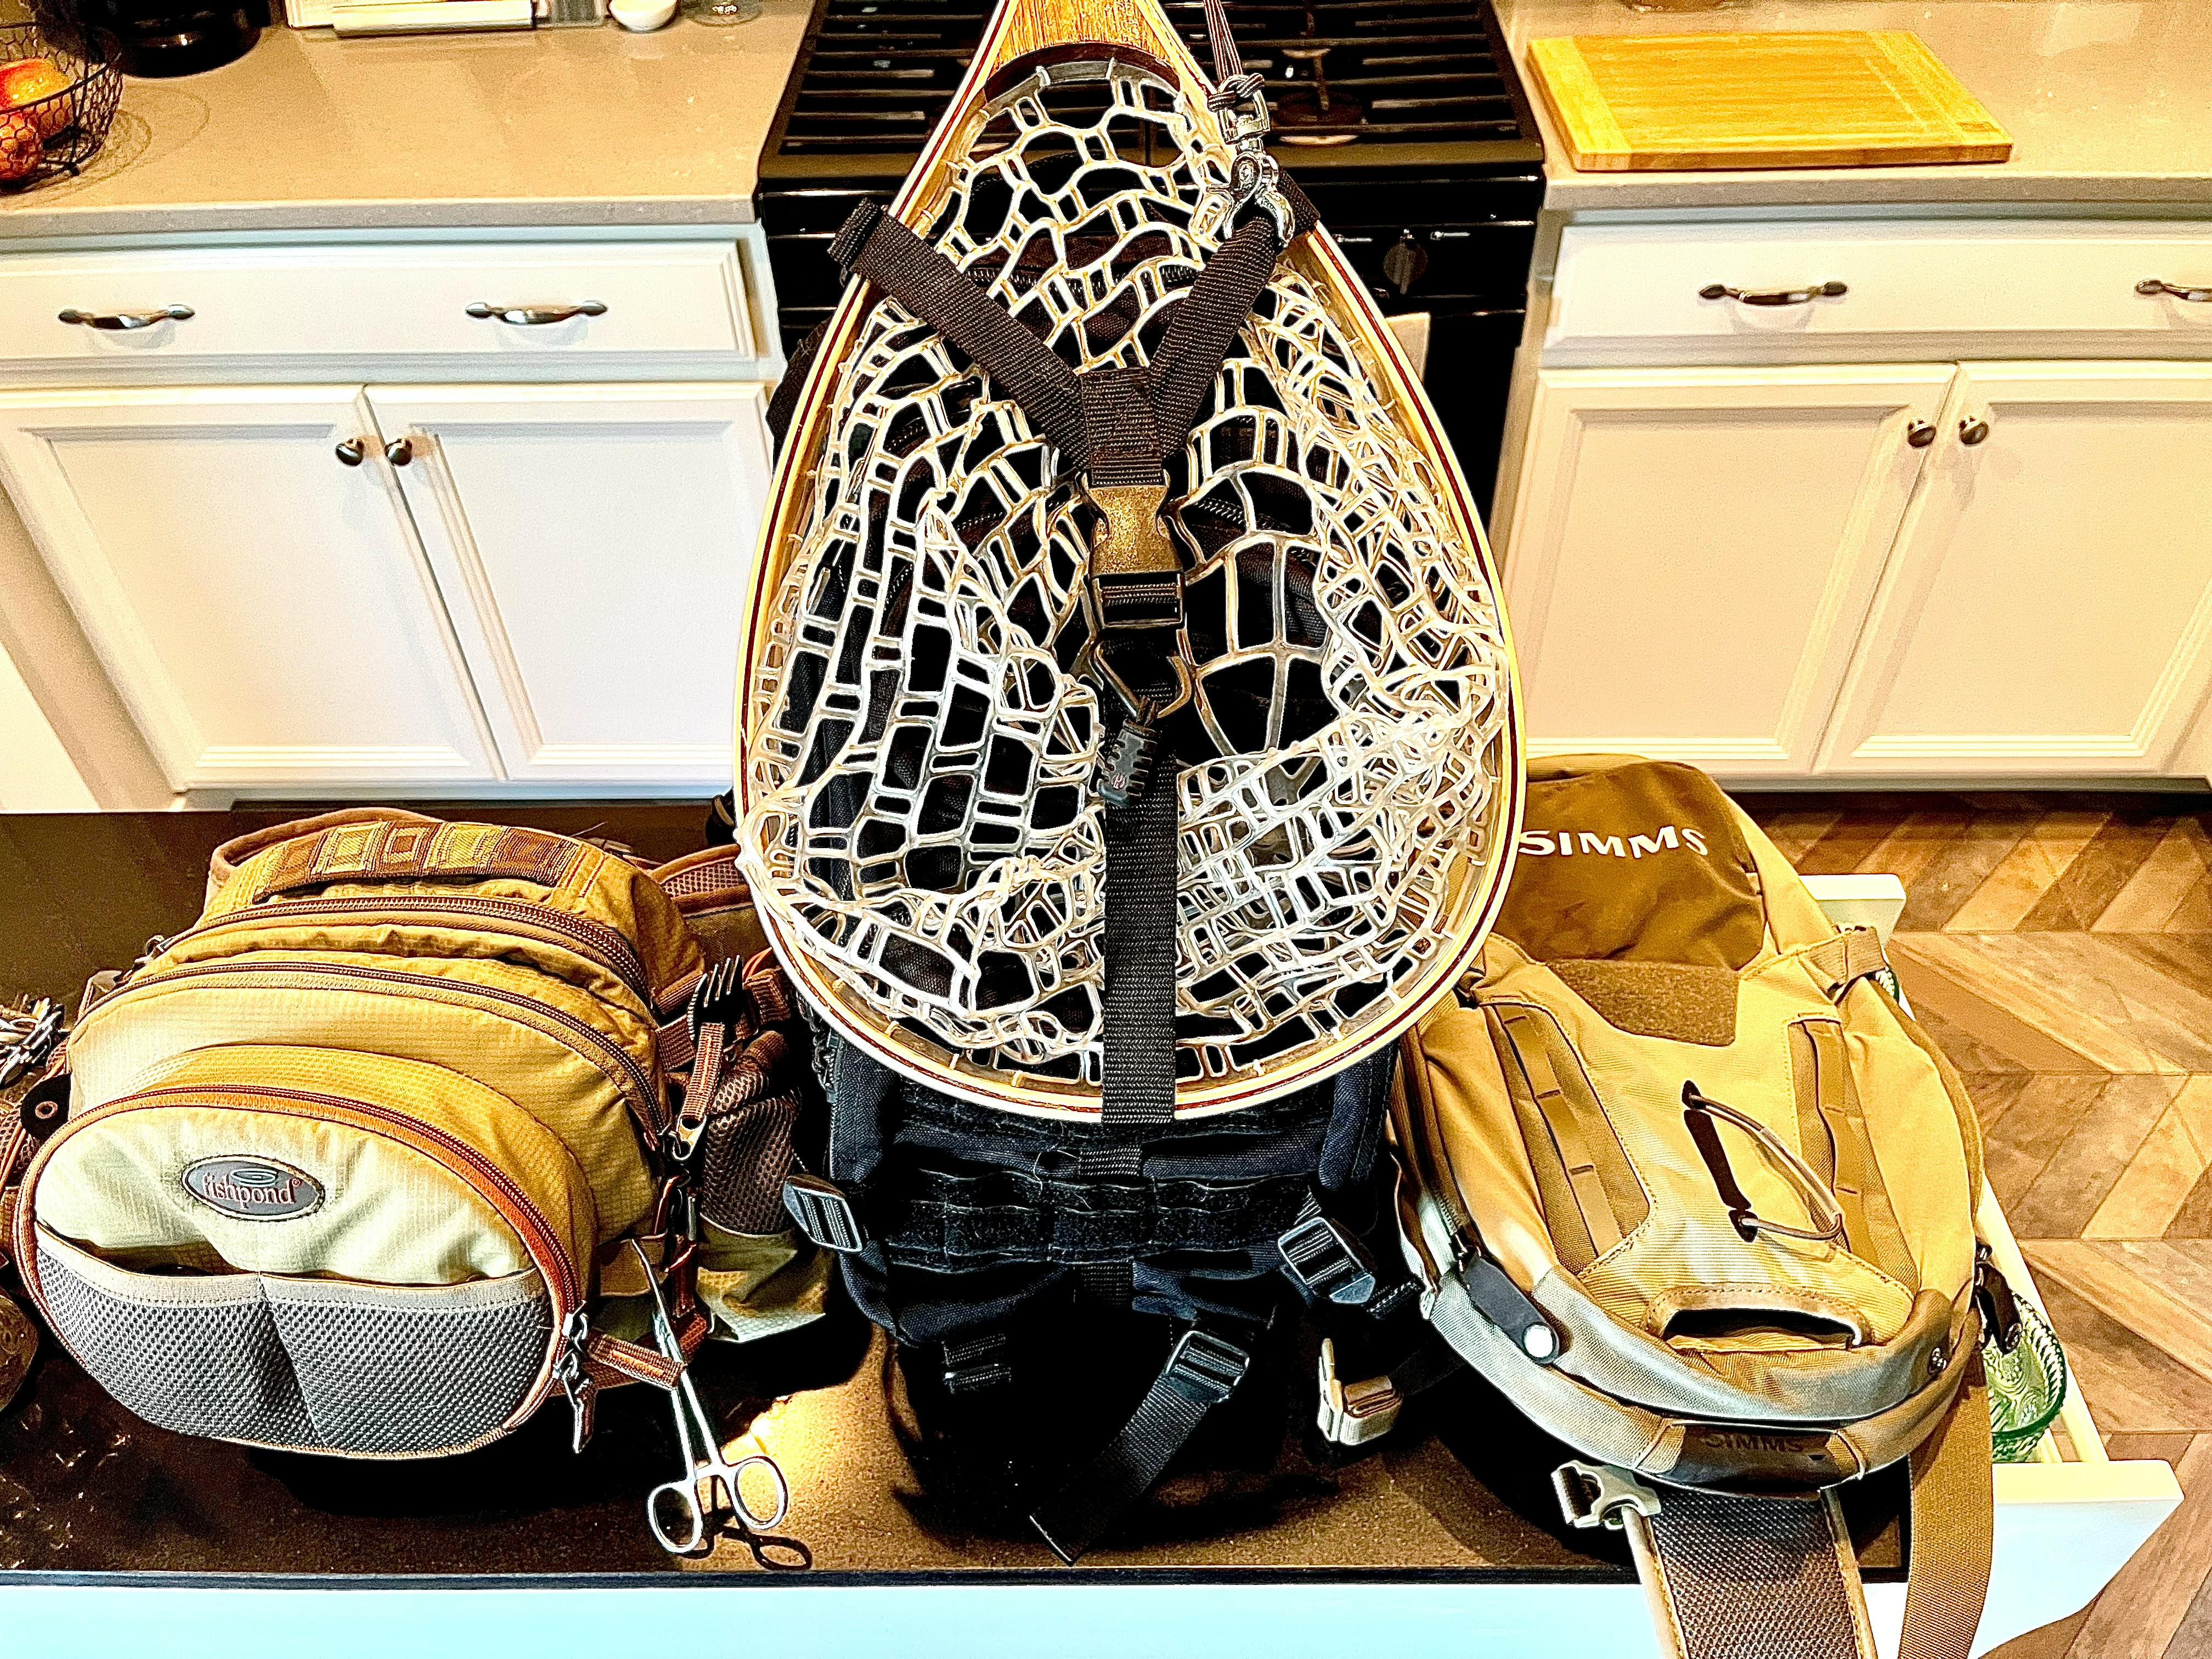 A fly fishing pack is laying in a kitchen with all the gear needed for fly fishing, such as a net, attached to the outside. 